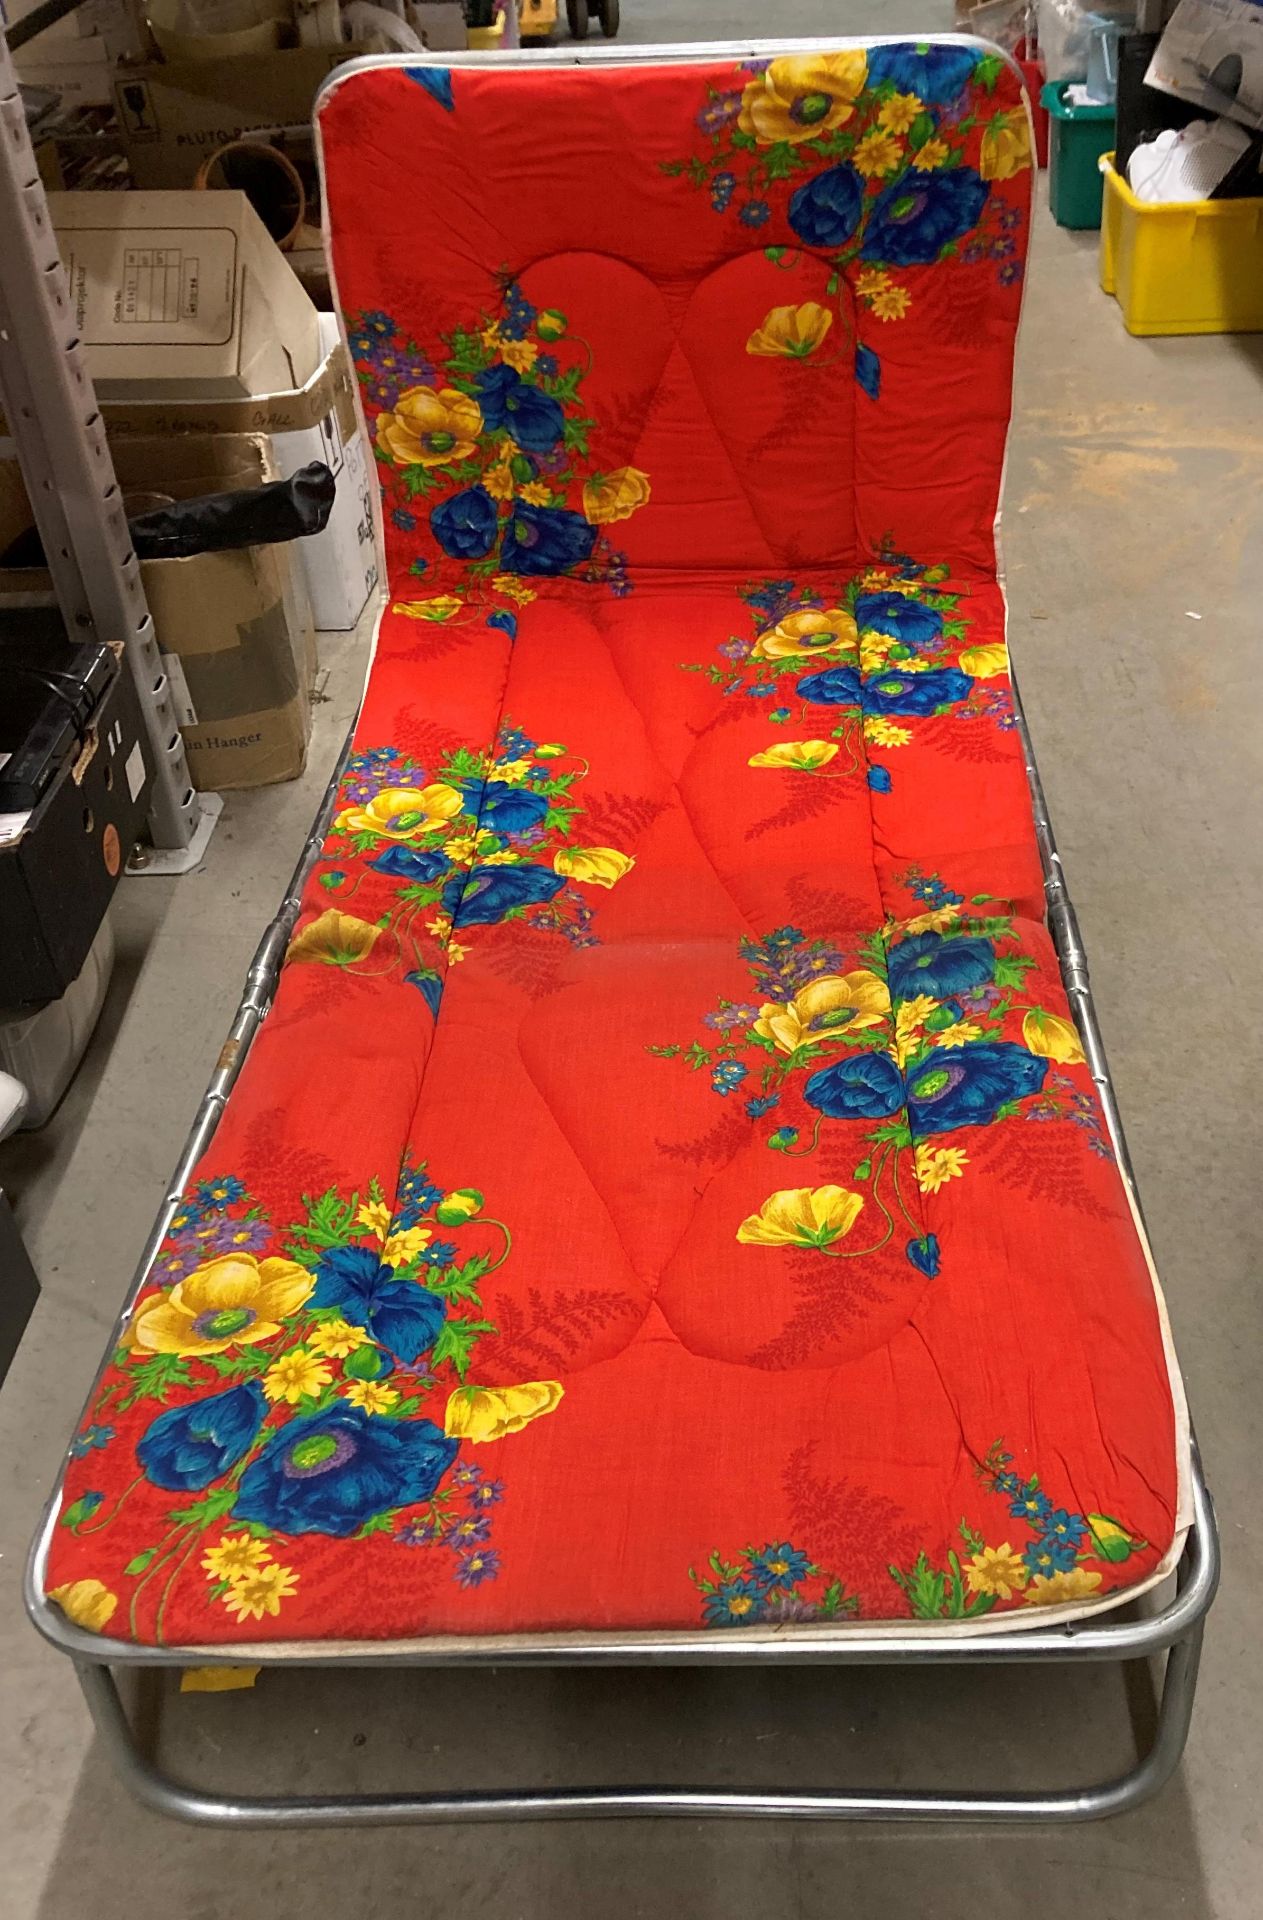 Aluminium framed sunlounger with red floral patterned cushion and brown metal framed sunlounger - Image 2 of 2